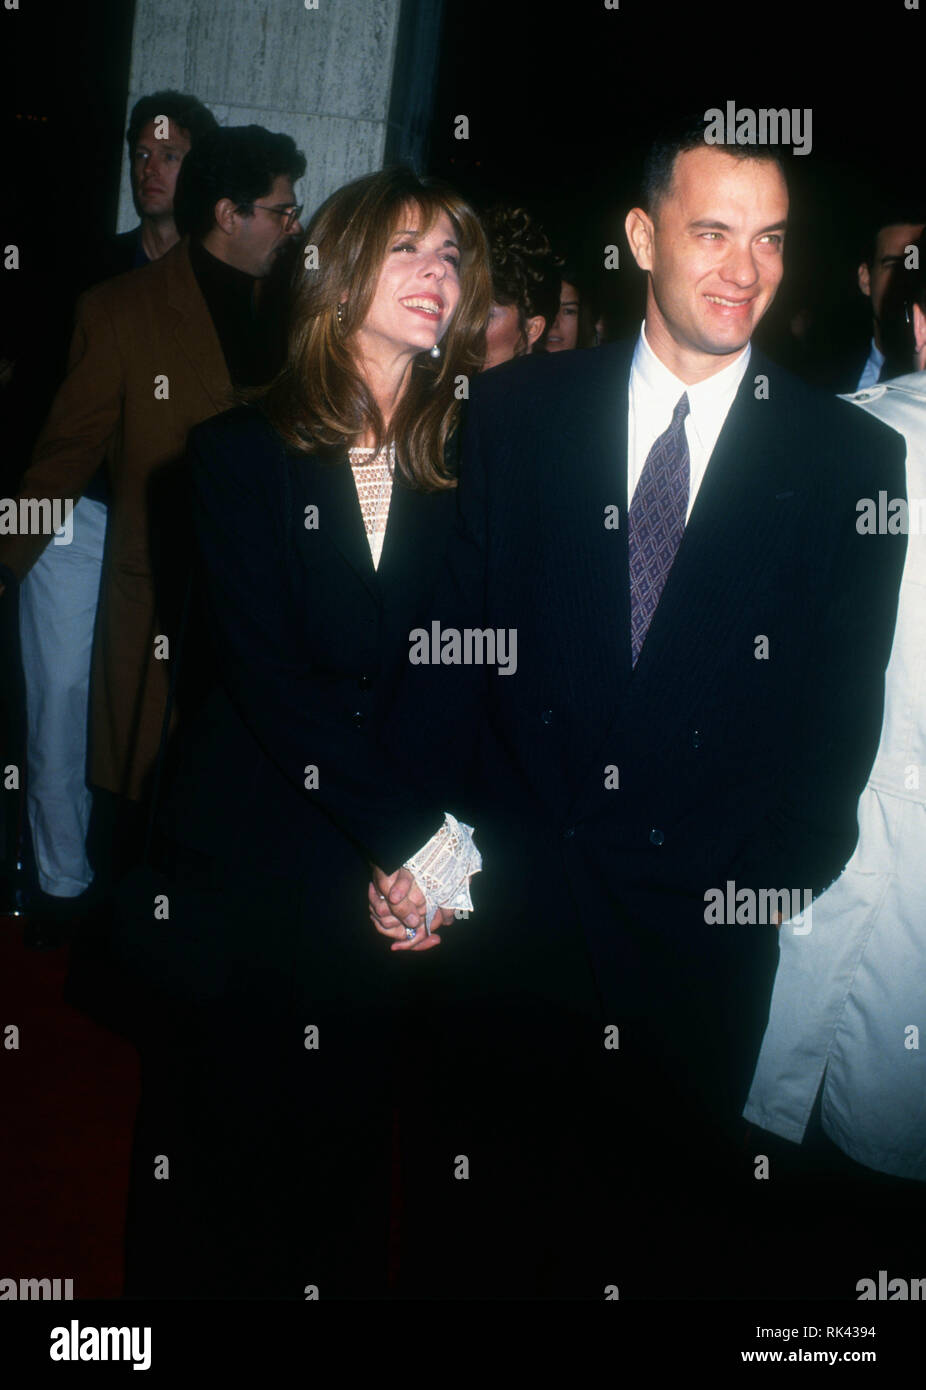 CENTURY CITY, CA - DECEMBER 14: Actor Tom Hanks and wife Rita Wilson attend TriStar Pictures' 'Philadelphia' Premiere on December 14, 1993 at Cineplex Odeon Century Plaza Cinemas in Century City, California. Photo by Barry King/Alamy Stock Photo Stock Photo